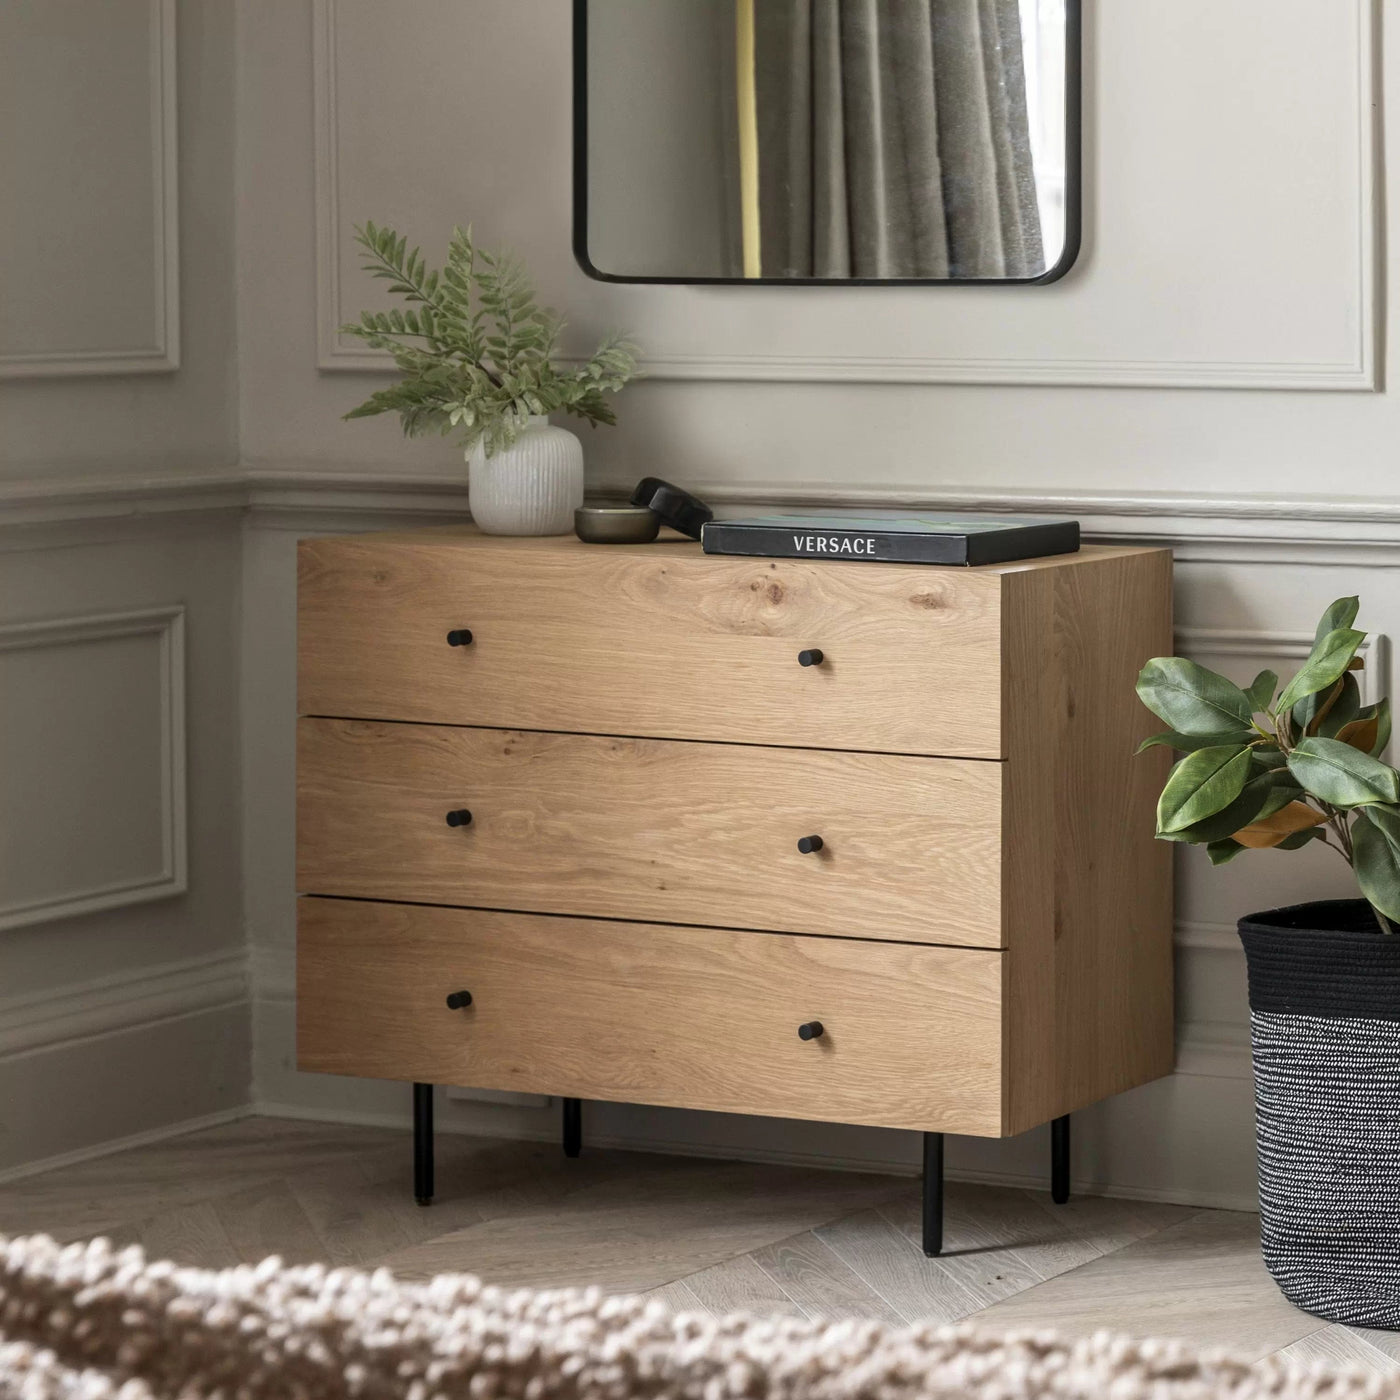 Bodhi Sleeping Netham 3 Drawer Chest Natural 400x900x750mm House of Isabella UK